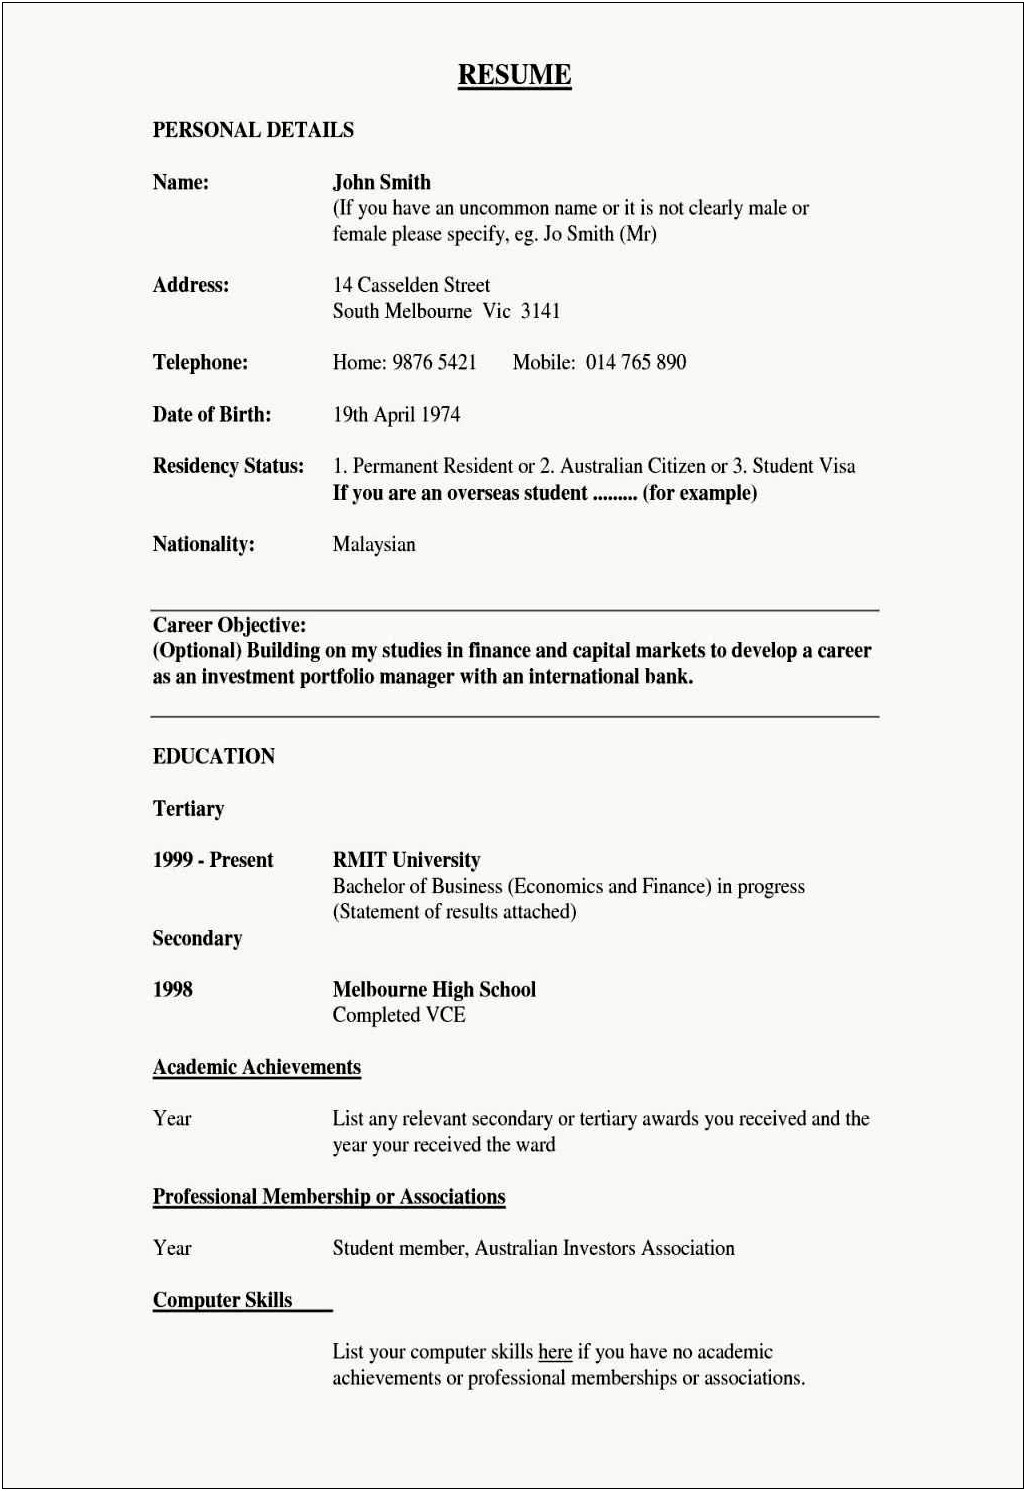 Sample Resume For Bank Teller With Experience